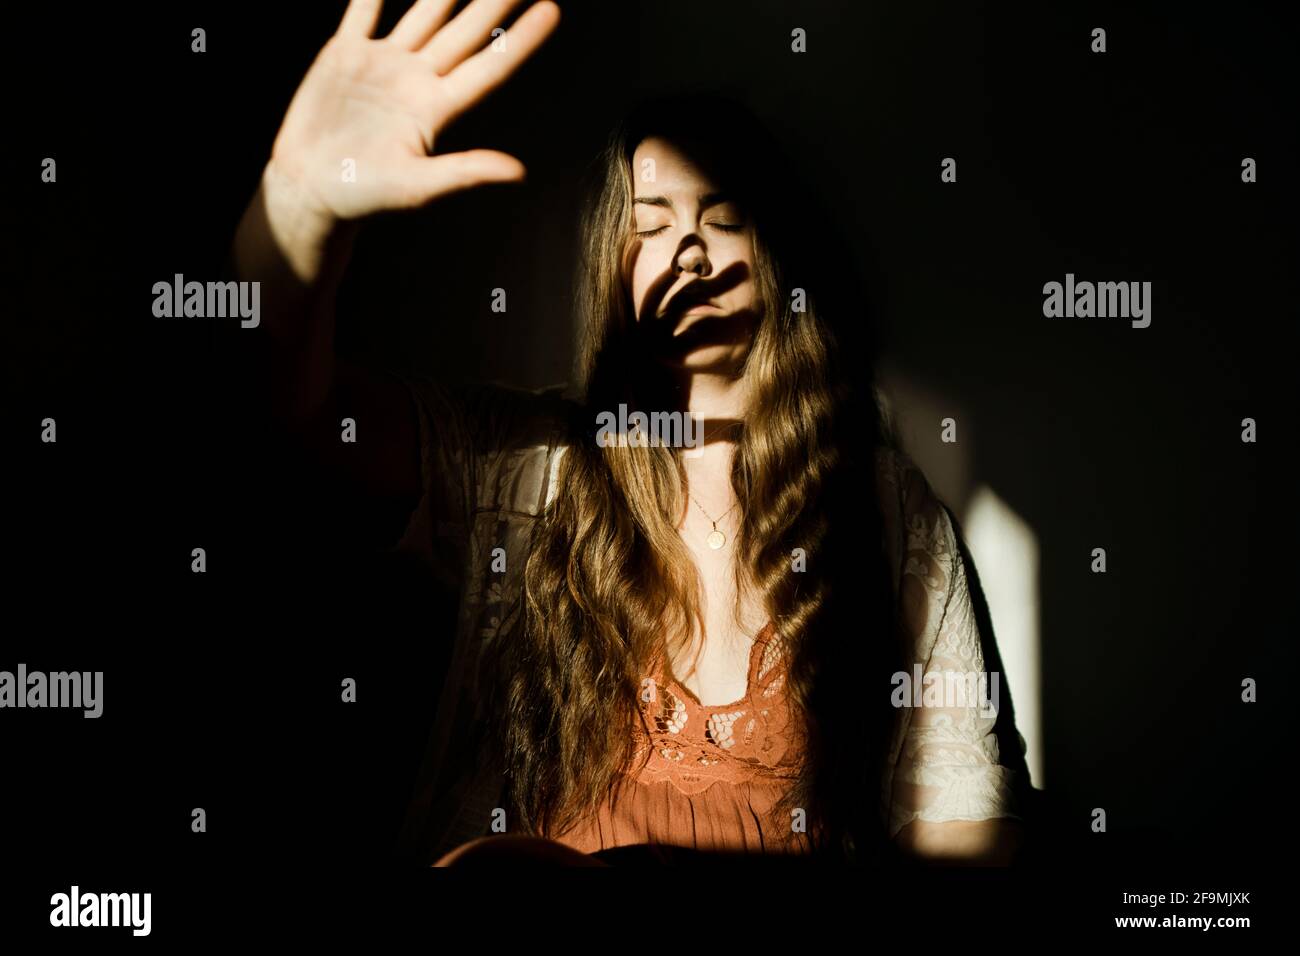 A woman holding up her hand to light casting a shadow on her face Stock Photo